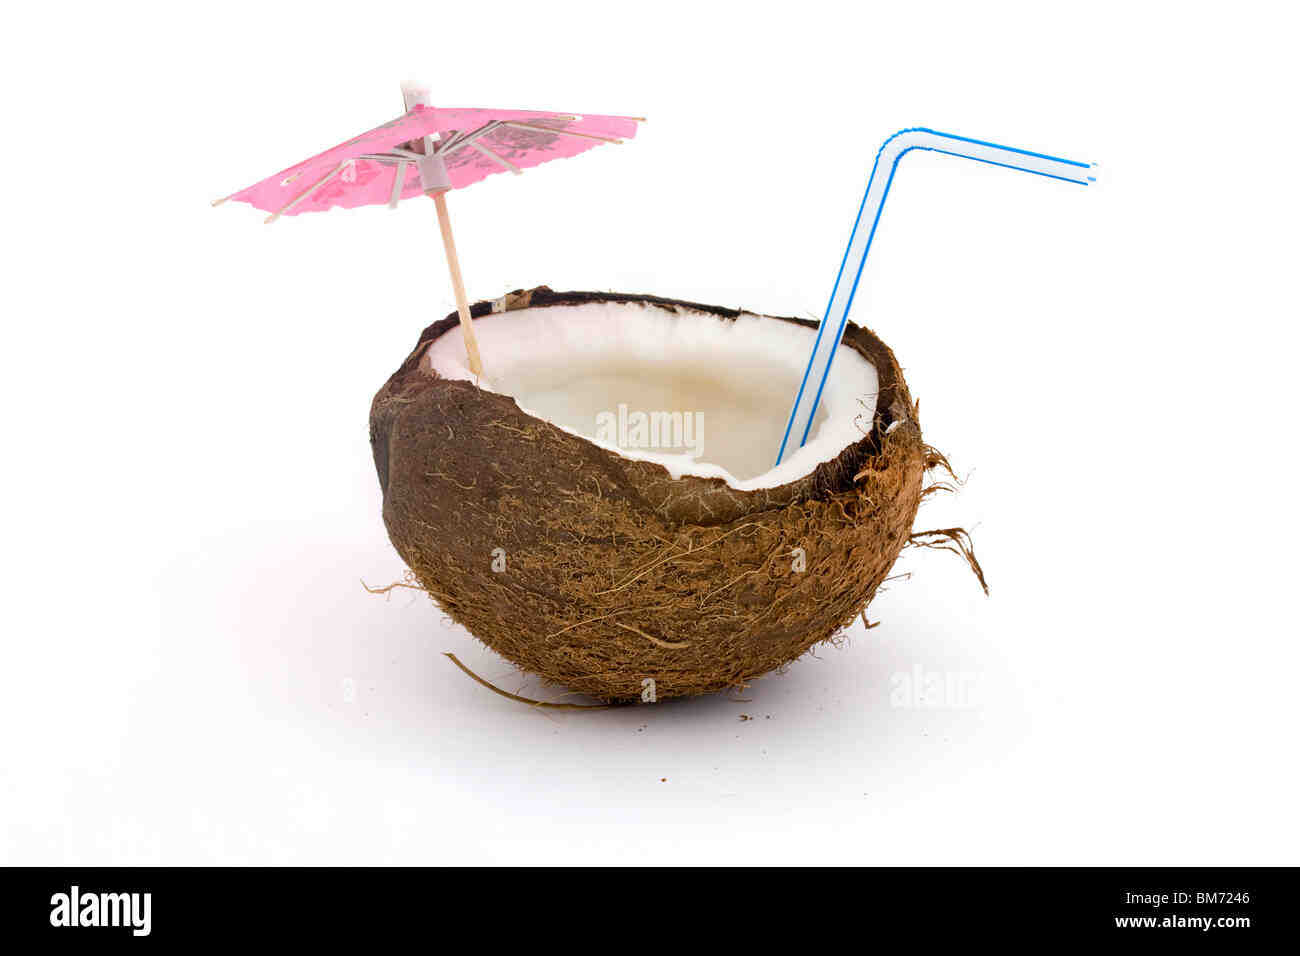 How do you open a coconut with a straw?